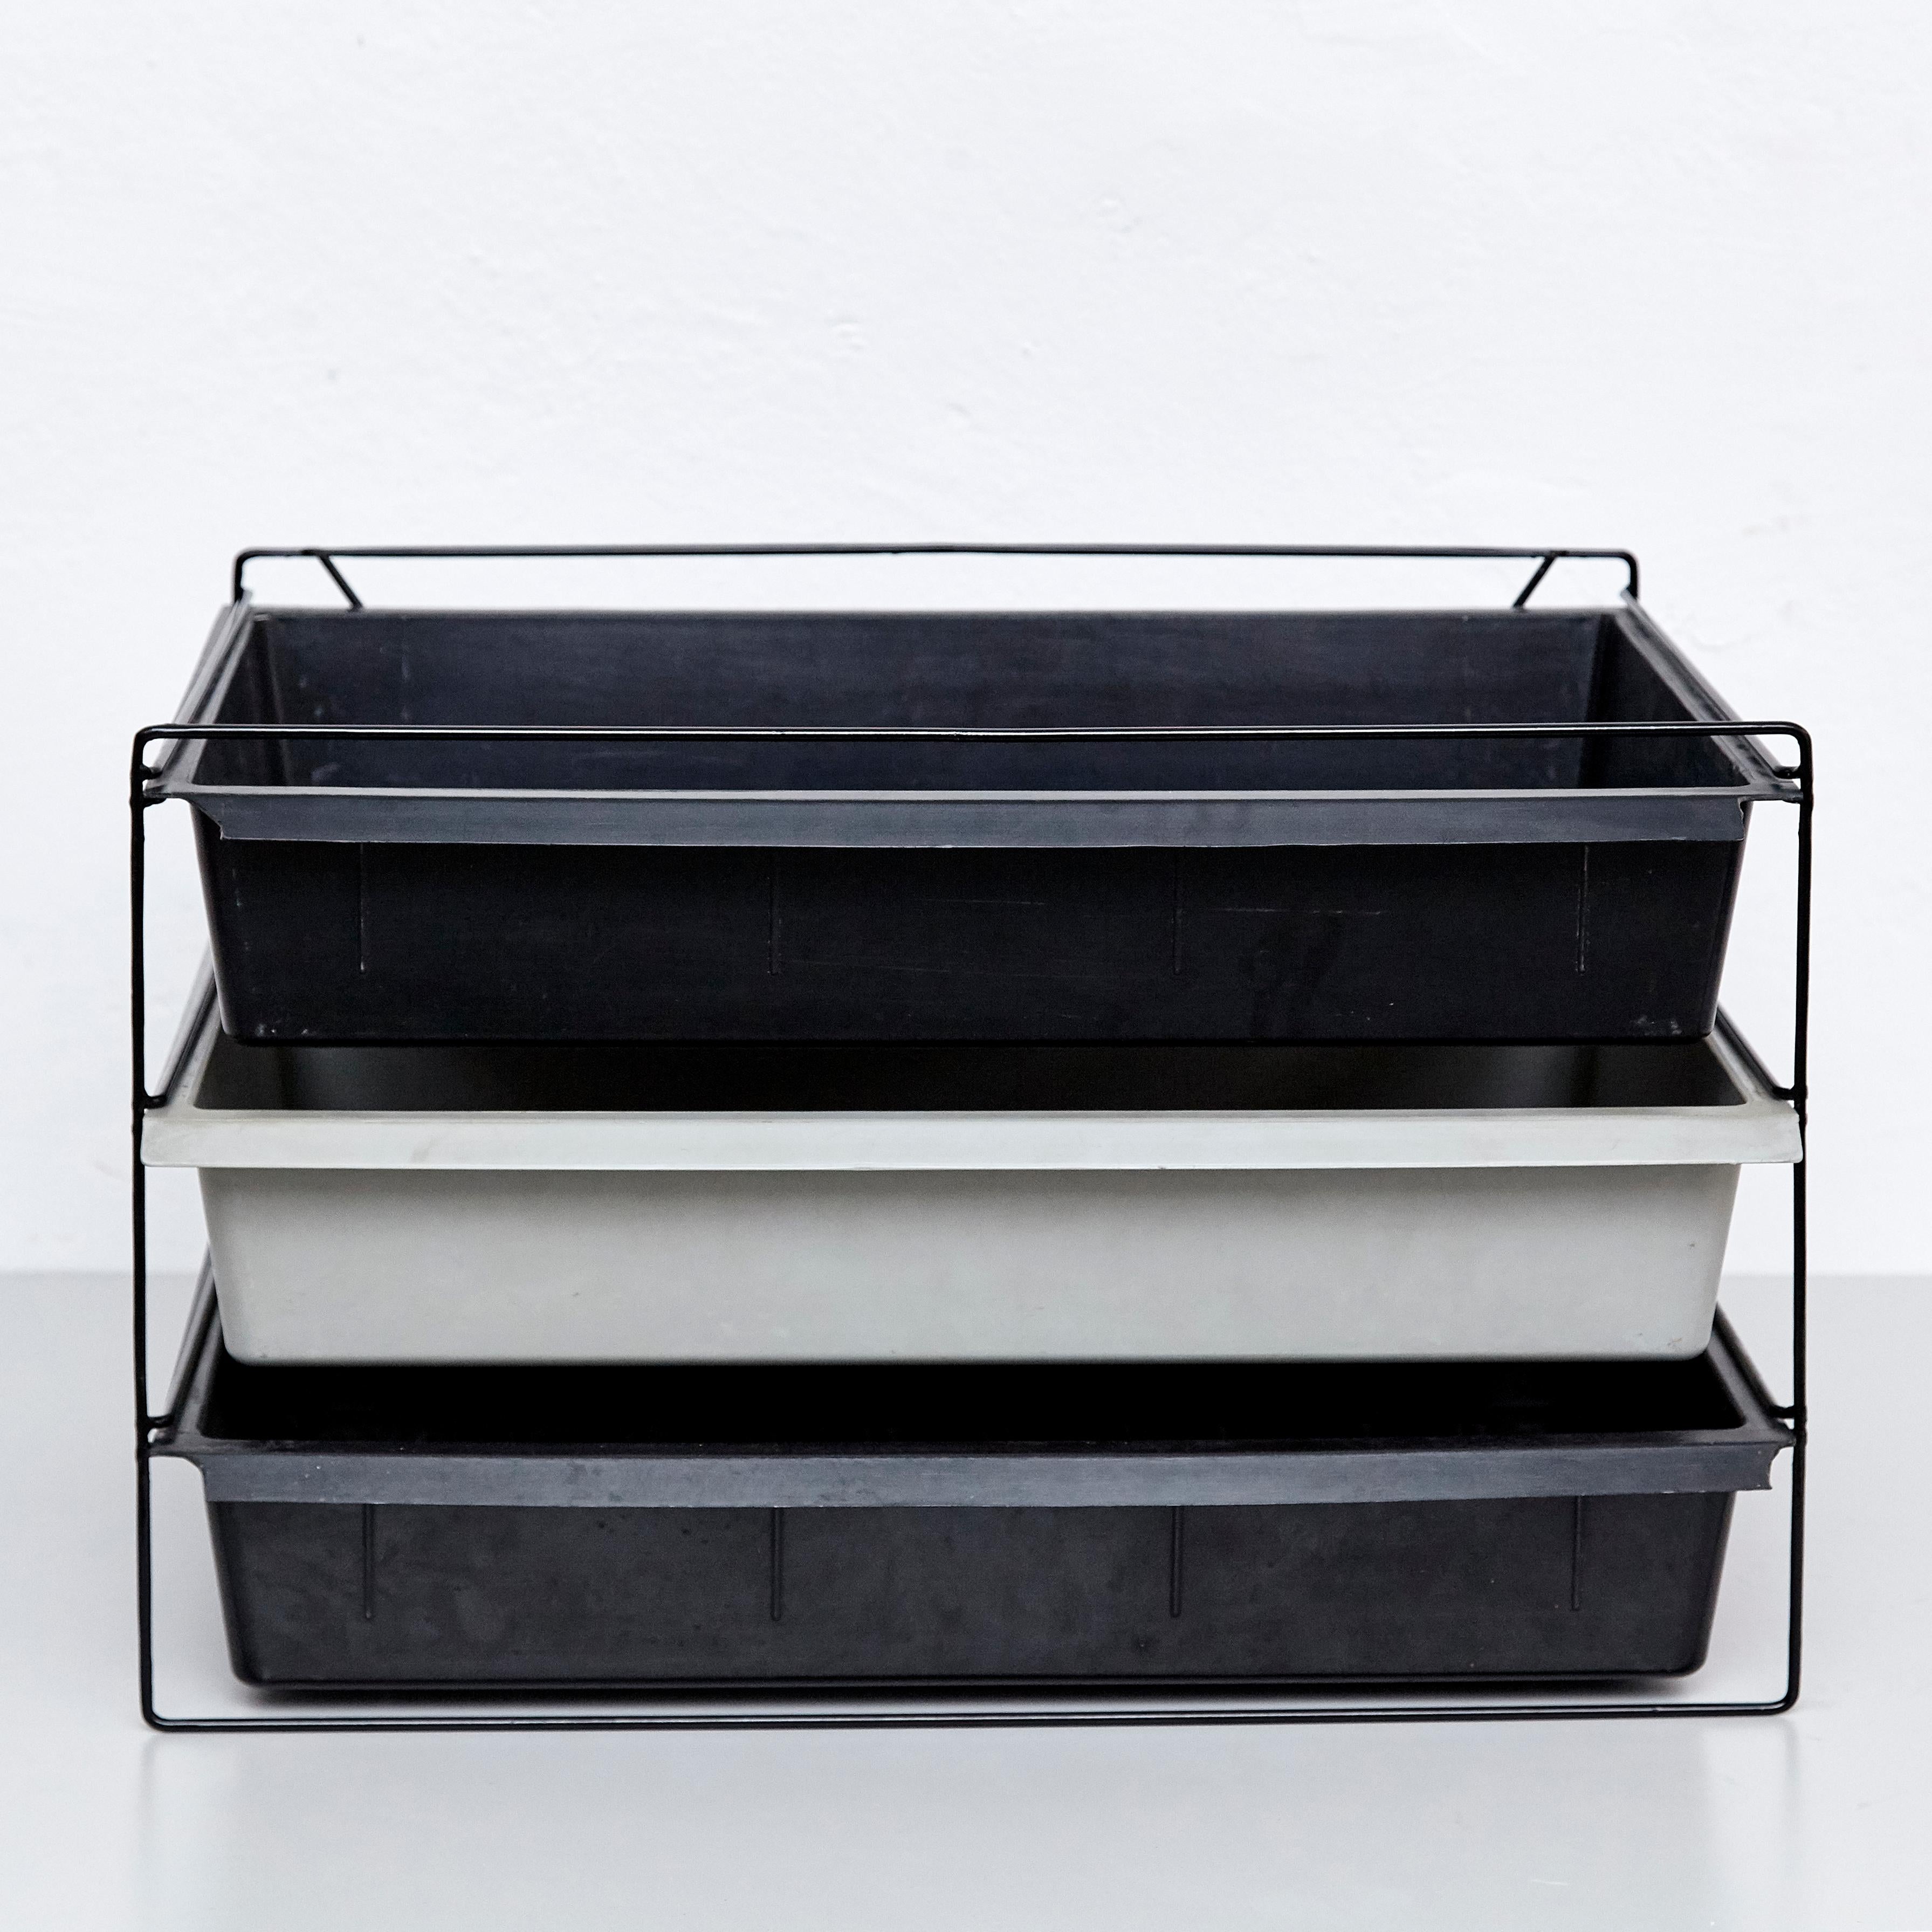 File rack designed by Charlotte Perriand, circa 1955.
Manufactured in France, circa 1955.
Moulded plastic and painted metal.

Each drawer moulded with Modele Charlotte Perriand/Brevete S.G.D.G.

In good condition, with minor wear consistent with age